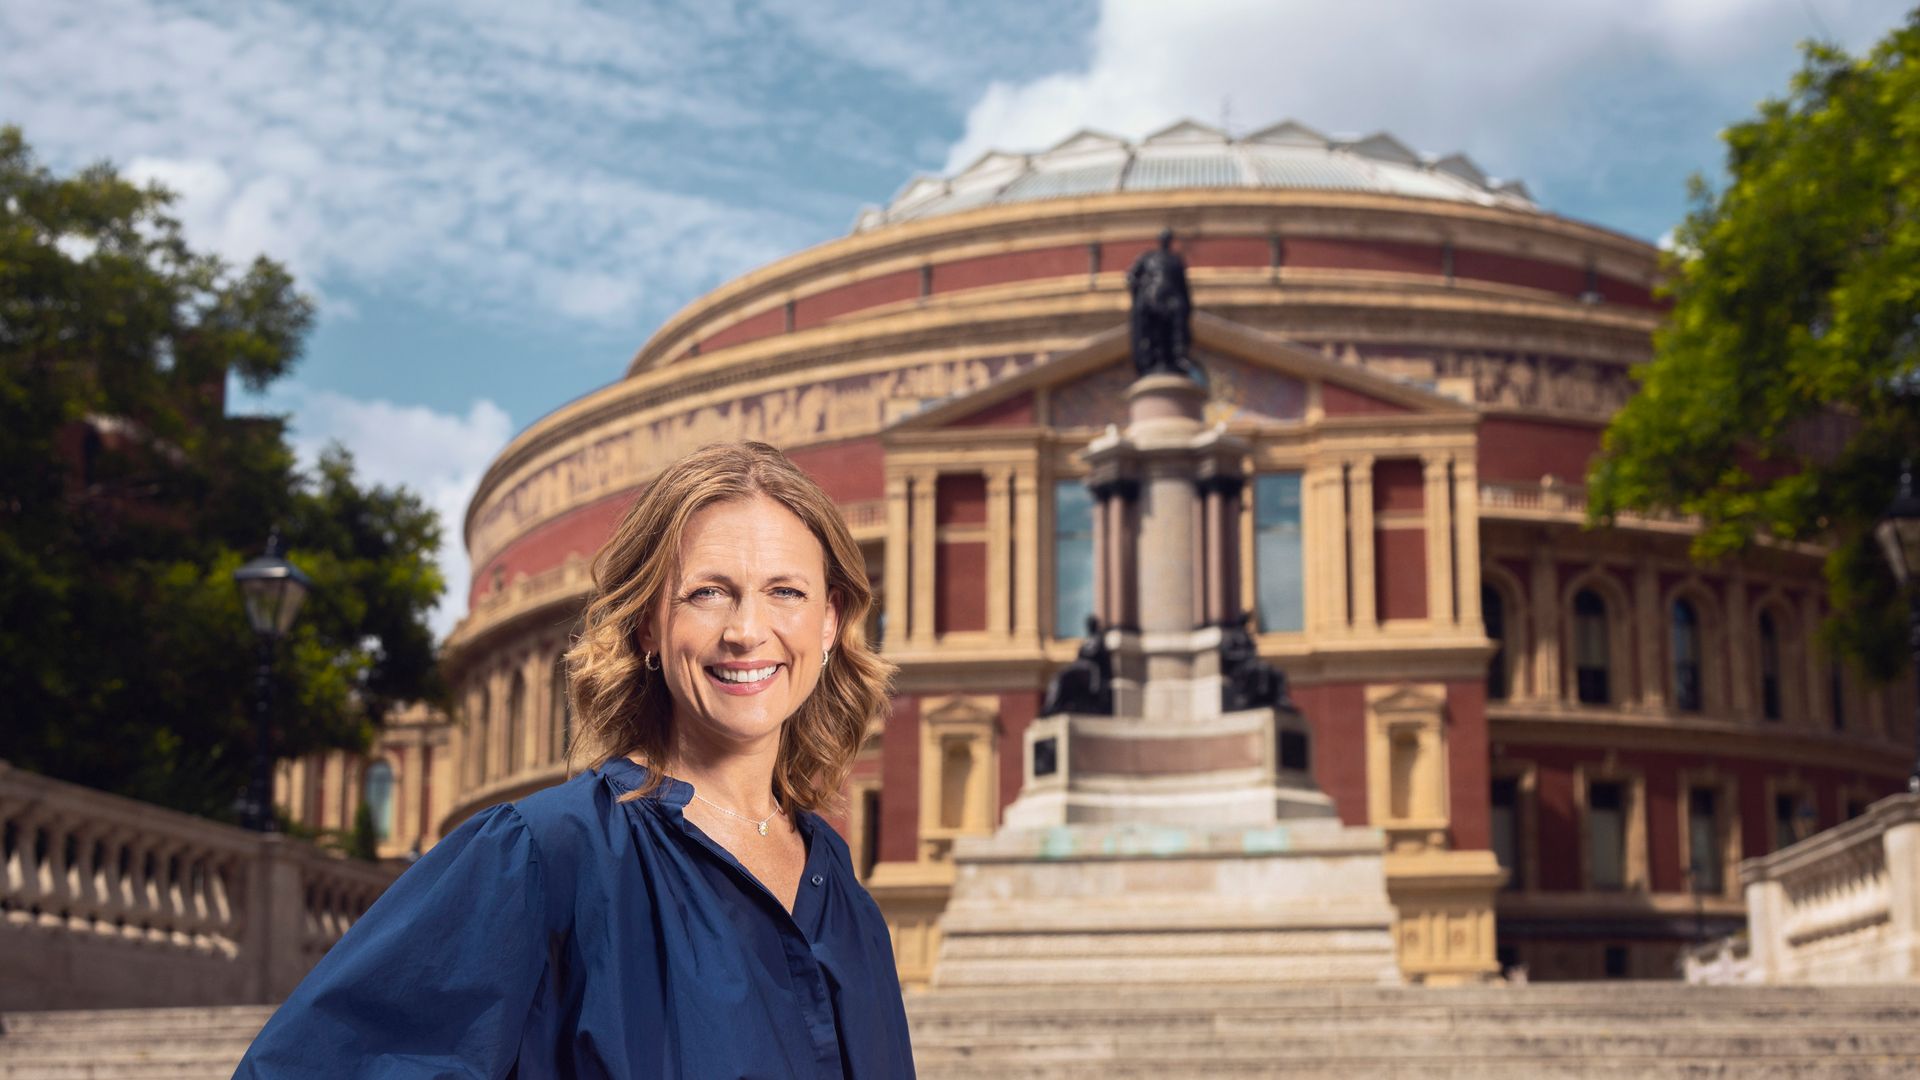 Big Give: Katie Derham and Julian Lloyd Webber reveal why supporting the arts is so close to their hearts